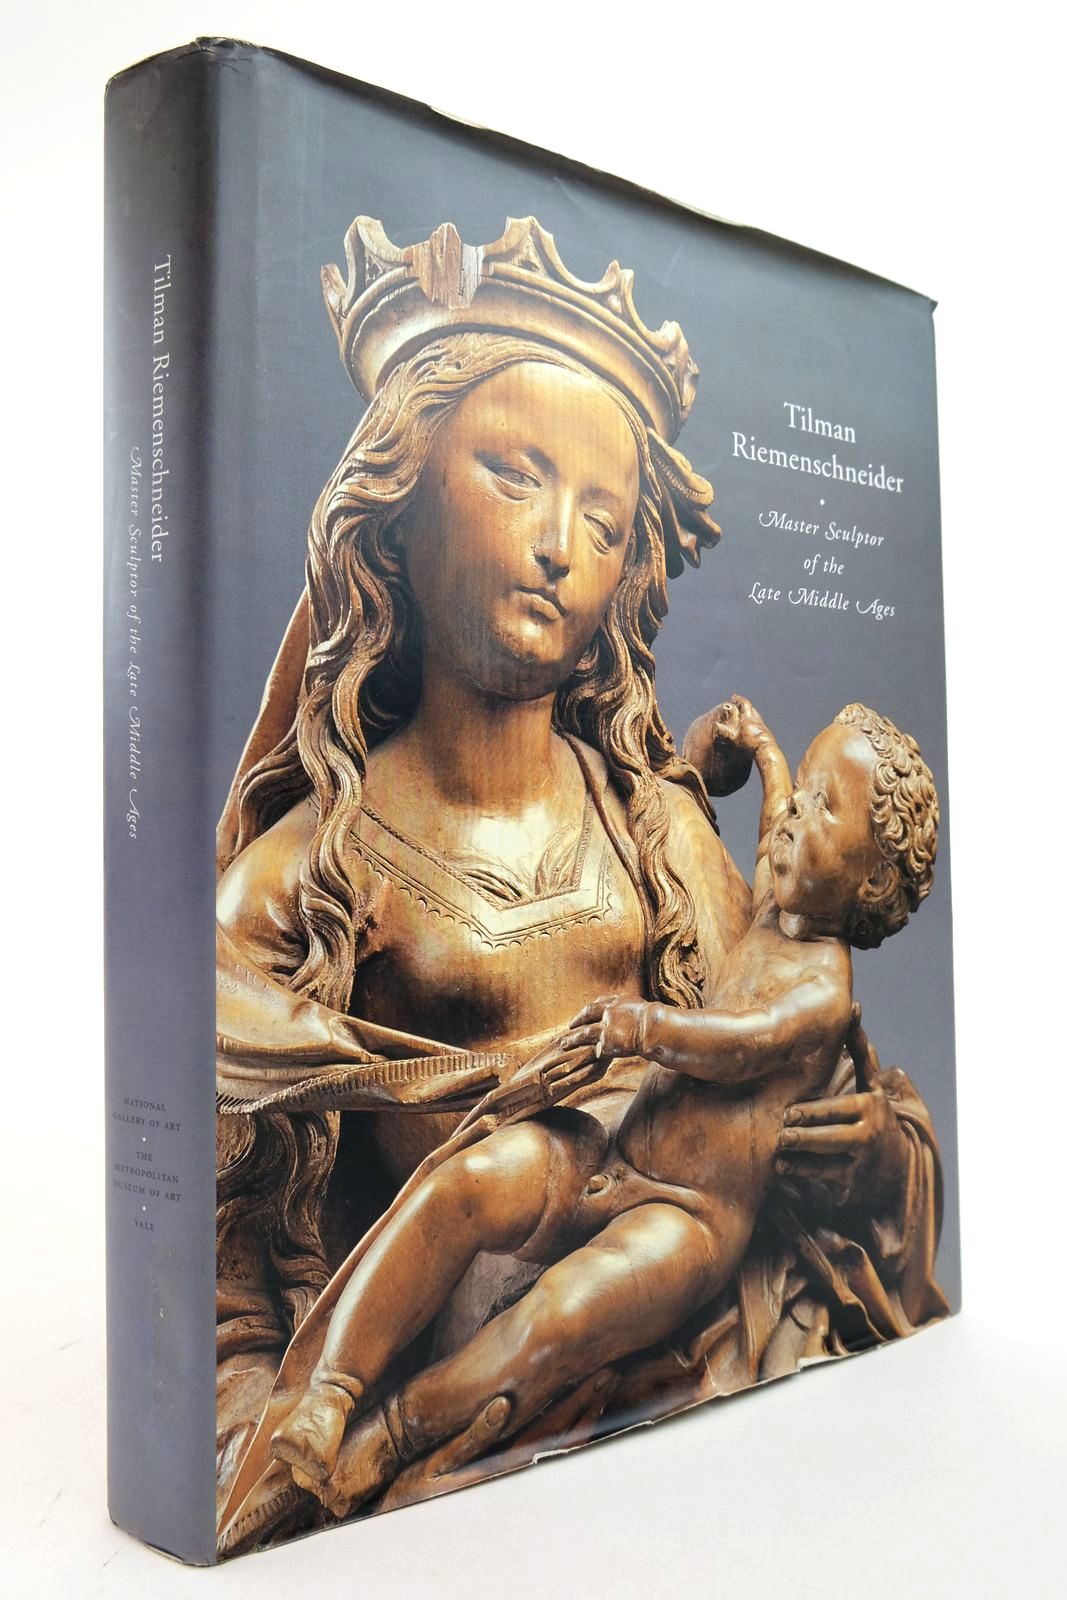 Photo of TILMAN RIEMENSCHNEIDER MASTER SCULPTOR OF THE LATE MIDDLE AGES written by Chapuis, Julien Baxandall, Michael et al, published by The National Gallery Of Art, Washington, The Metropolitan Museum of Art, Yale University Press (STOCK CODE: 2139075)  for sale by Stella & Rose's Books